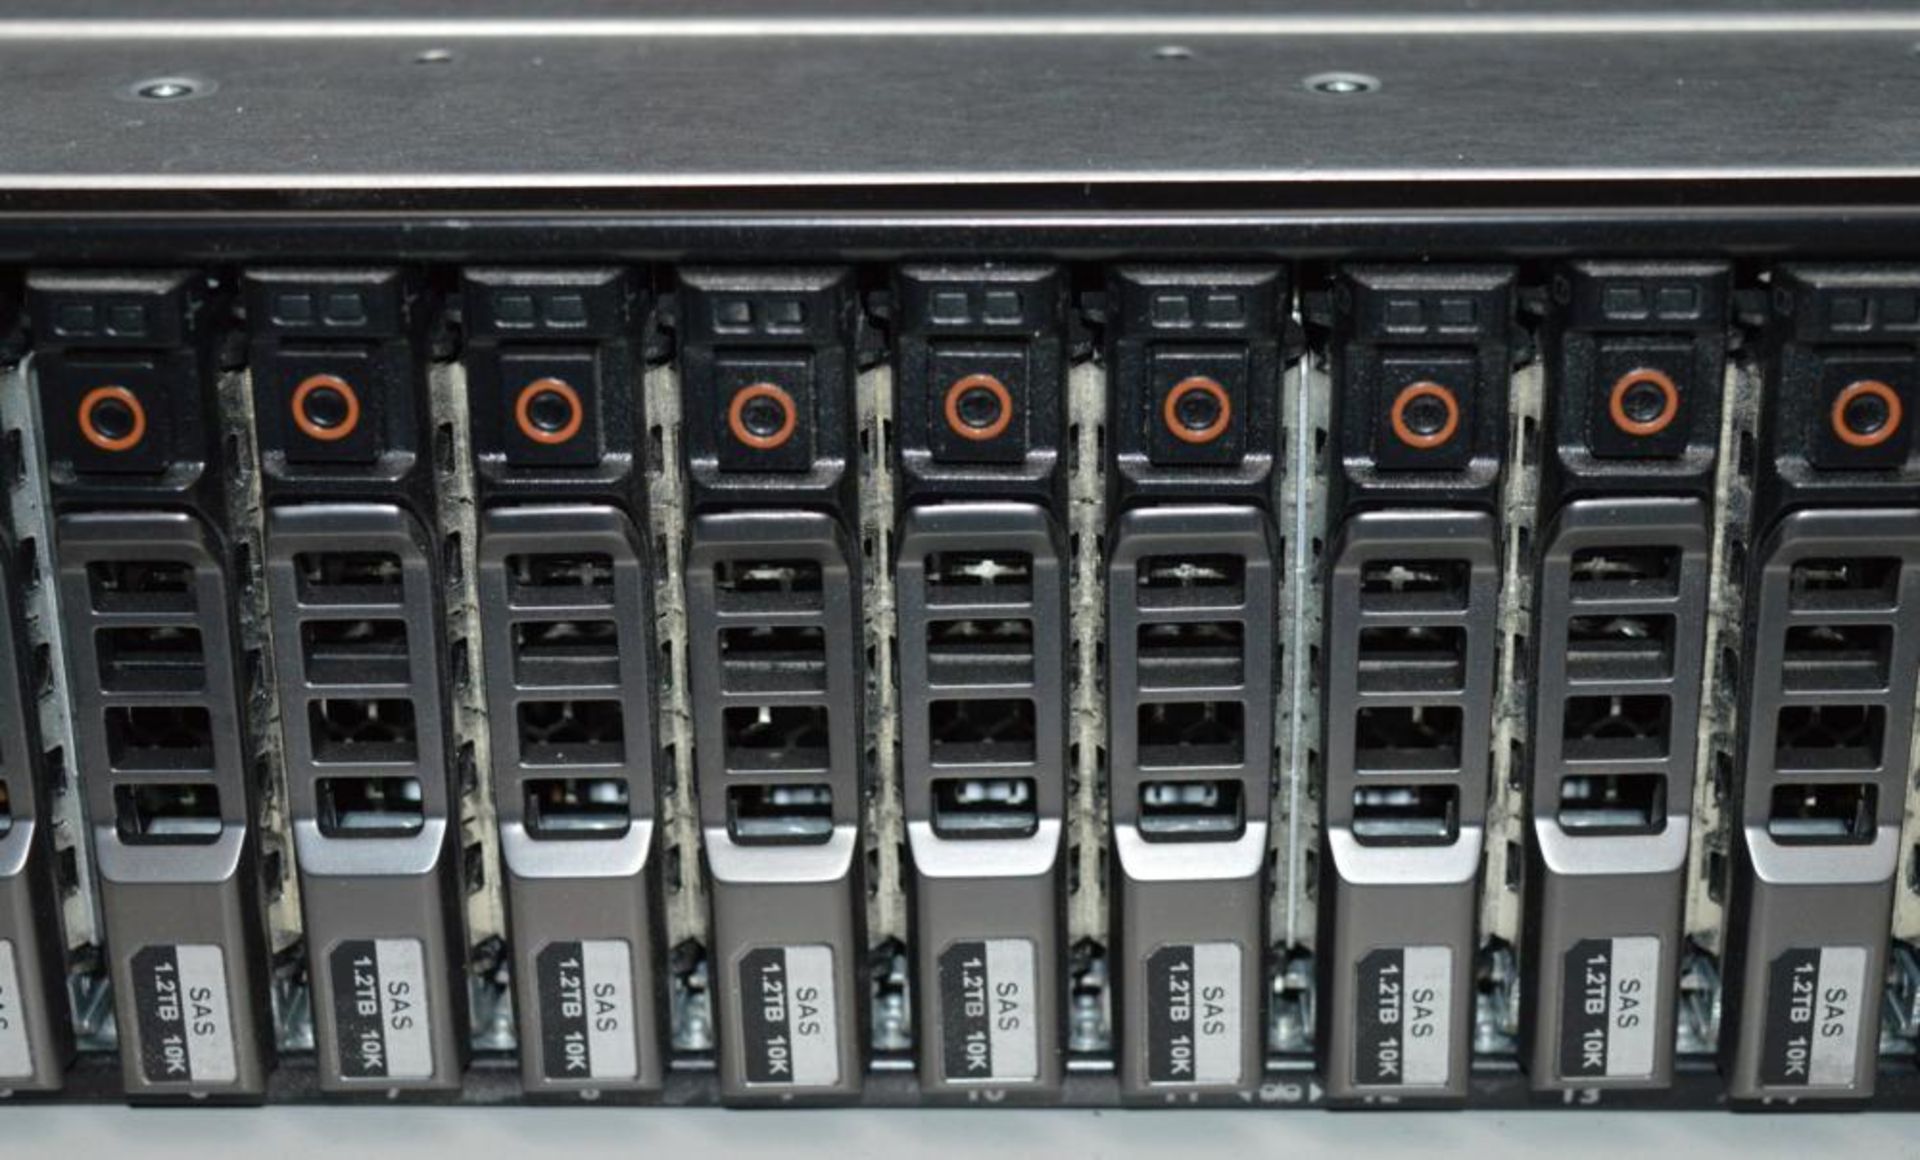 1 x Dell PowerVault MD1220 With Daul 600w PSU's and 2 x MD12 6Gb SAS Controllers - Image 6 of 8